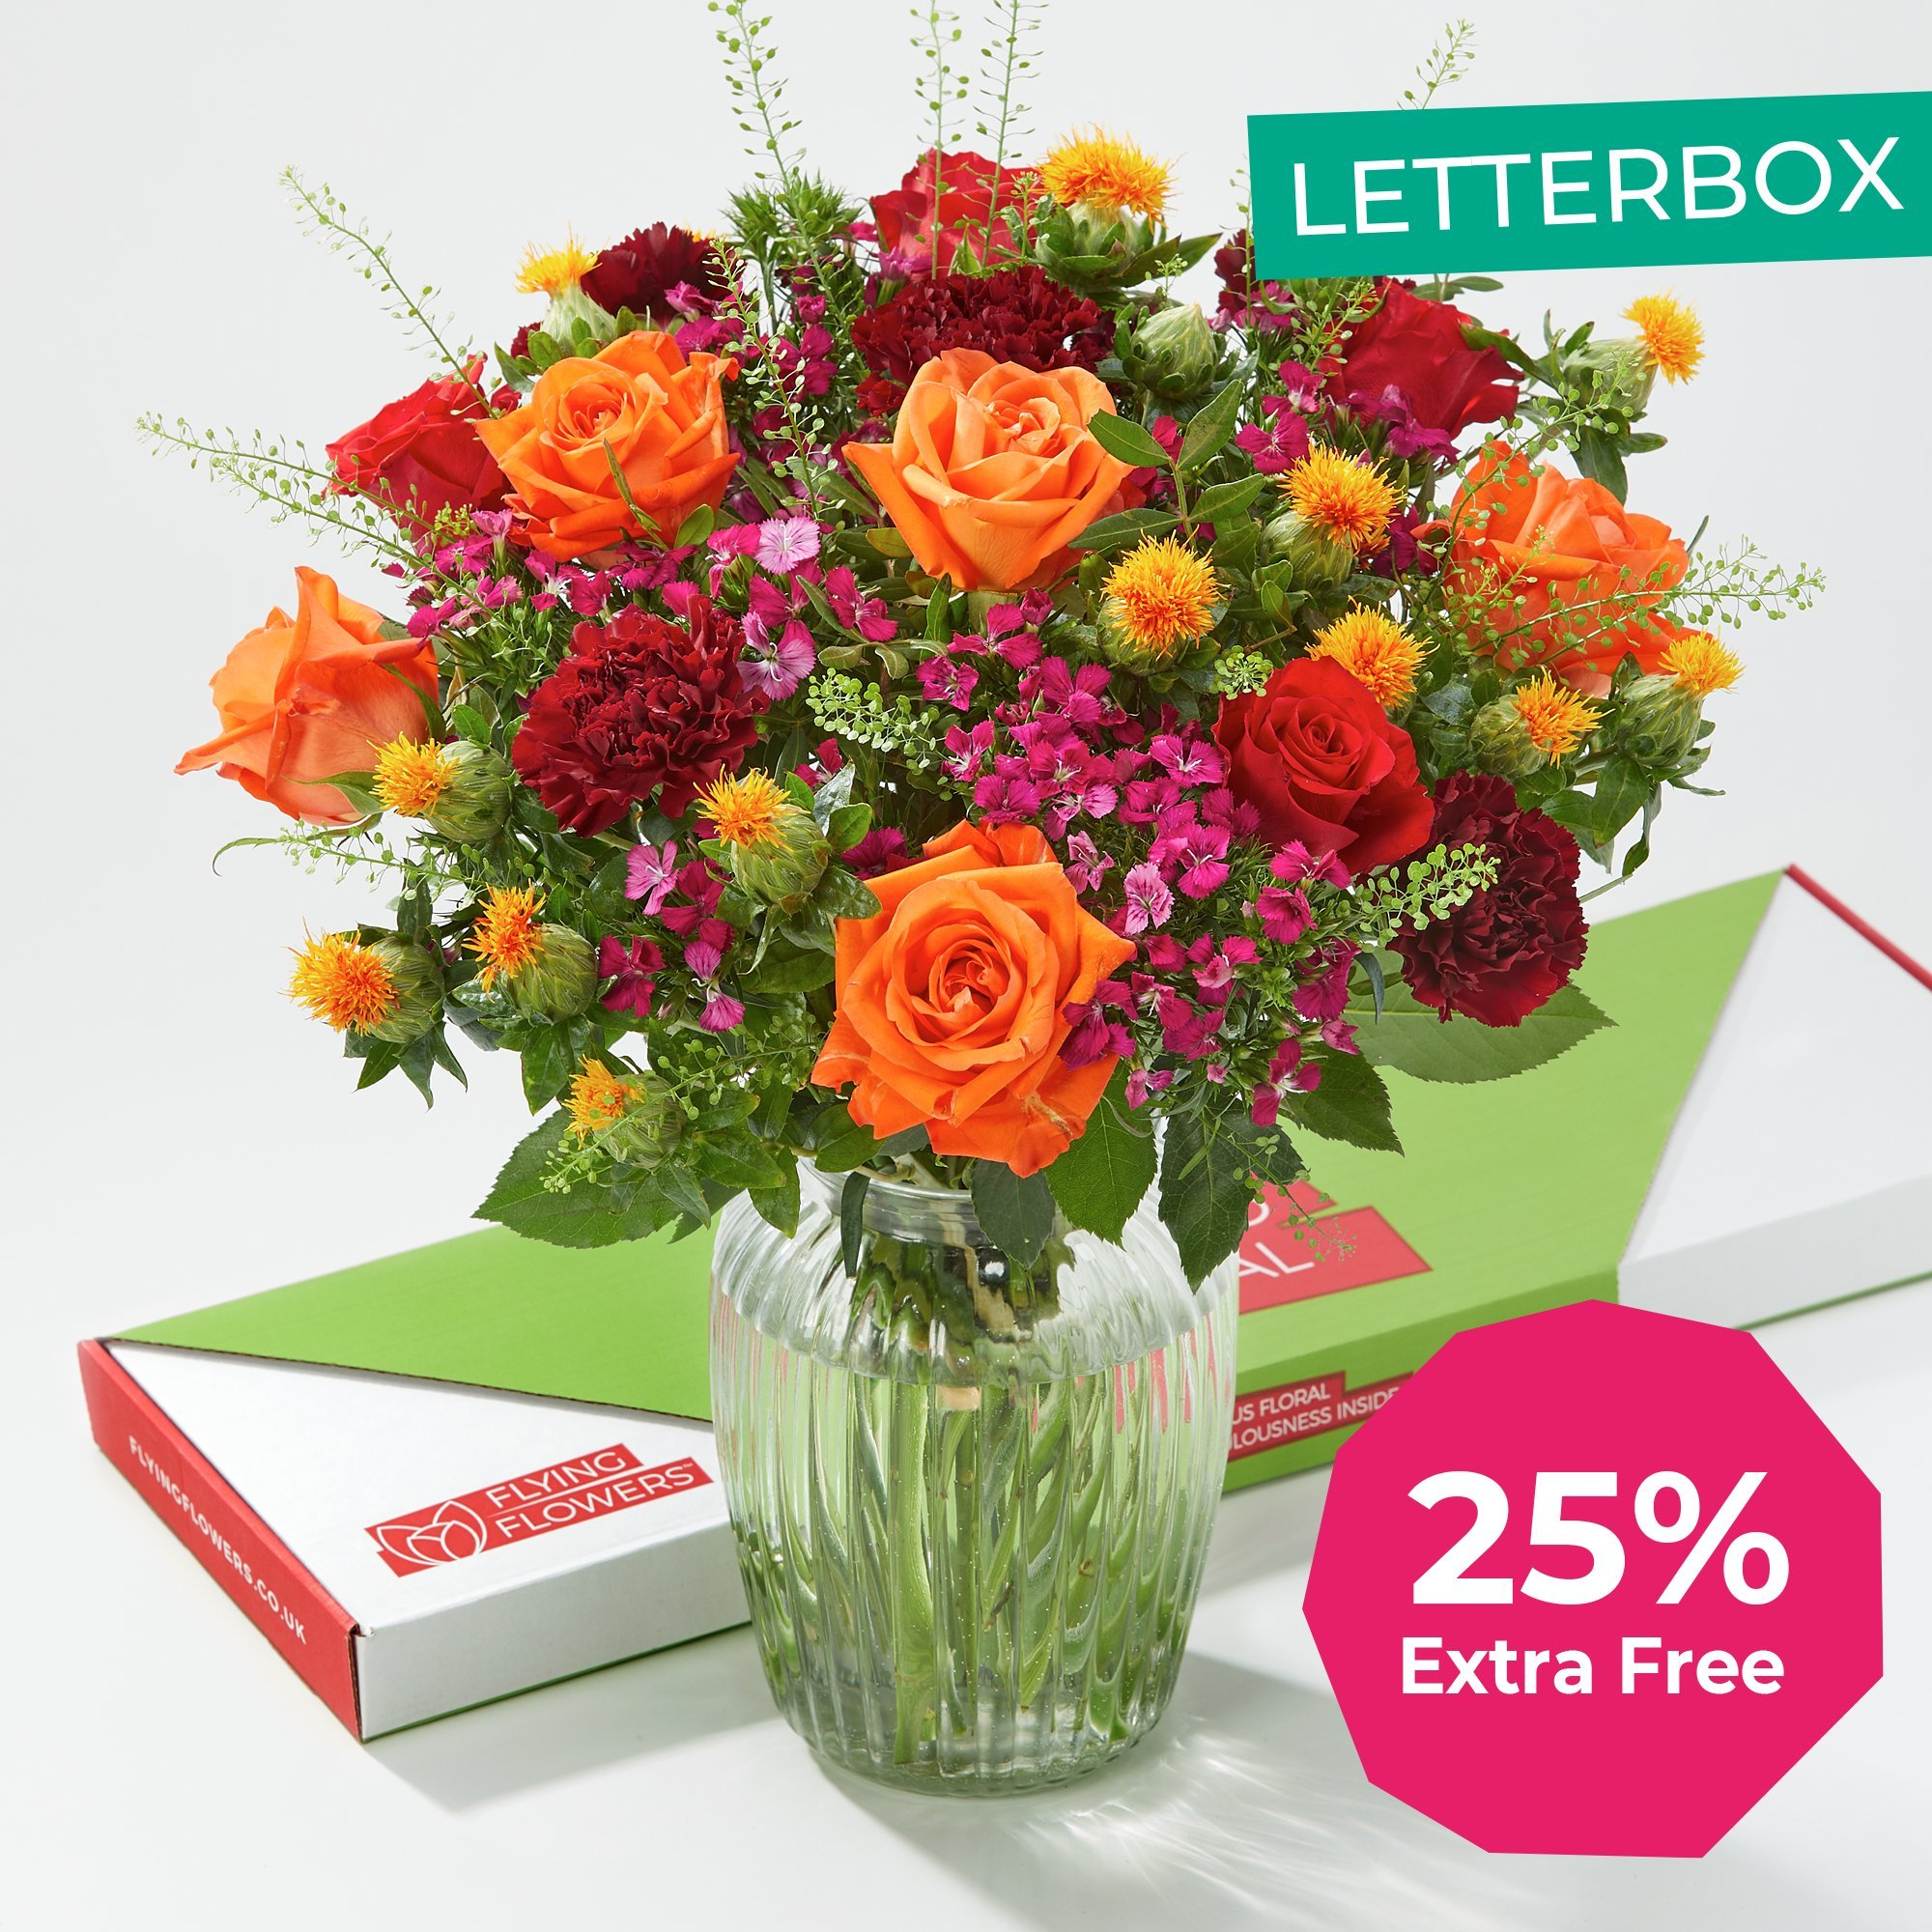 Autumn Meadow Letterbox + 25% Extra Free